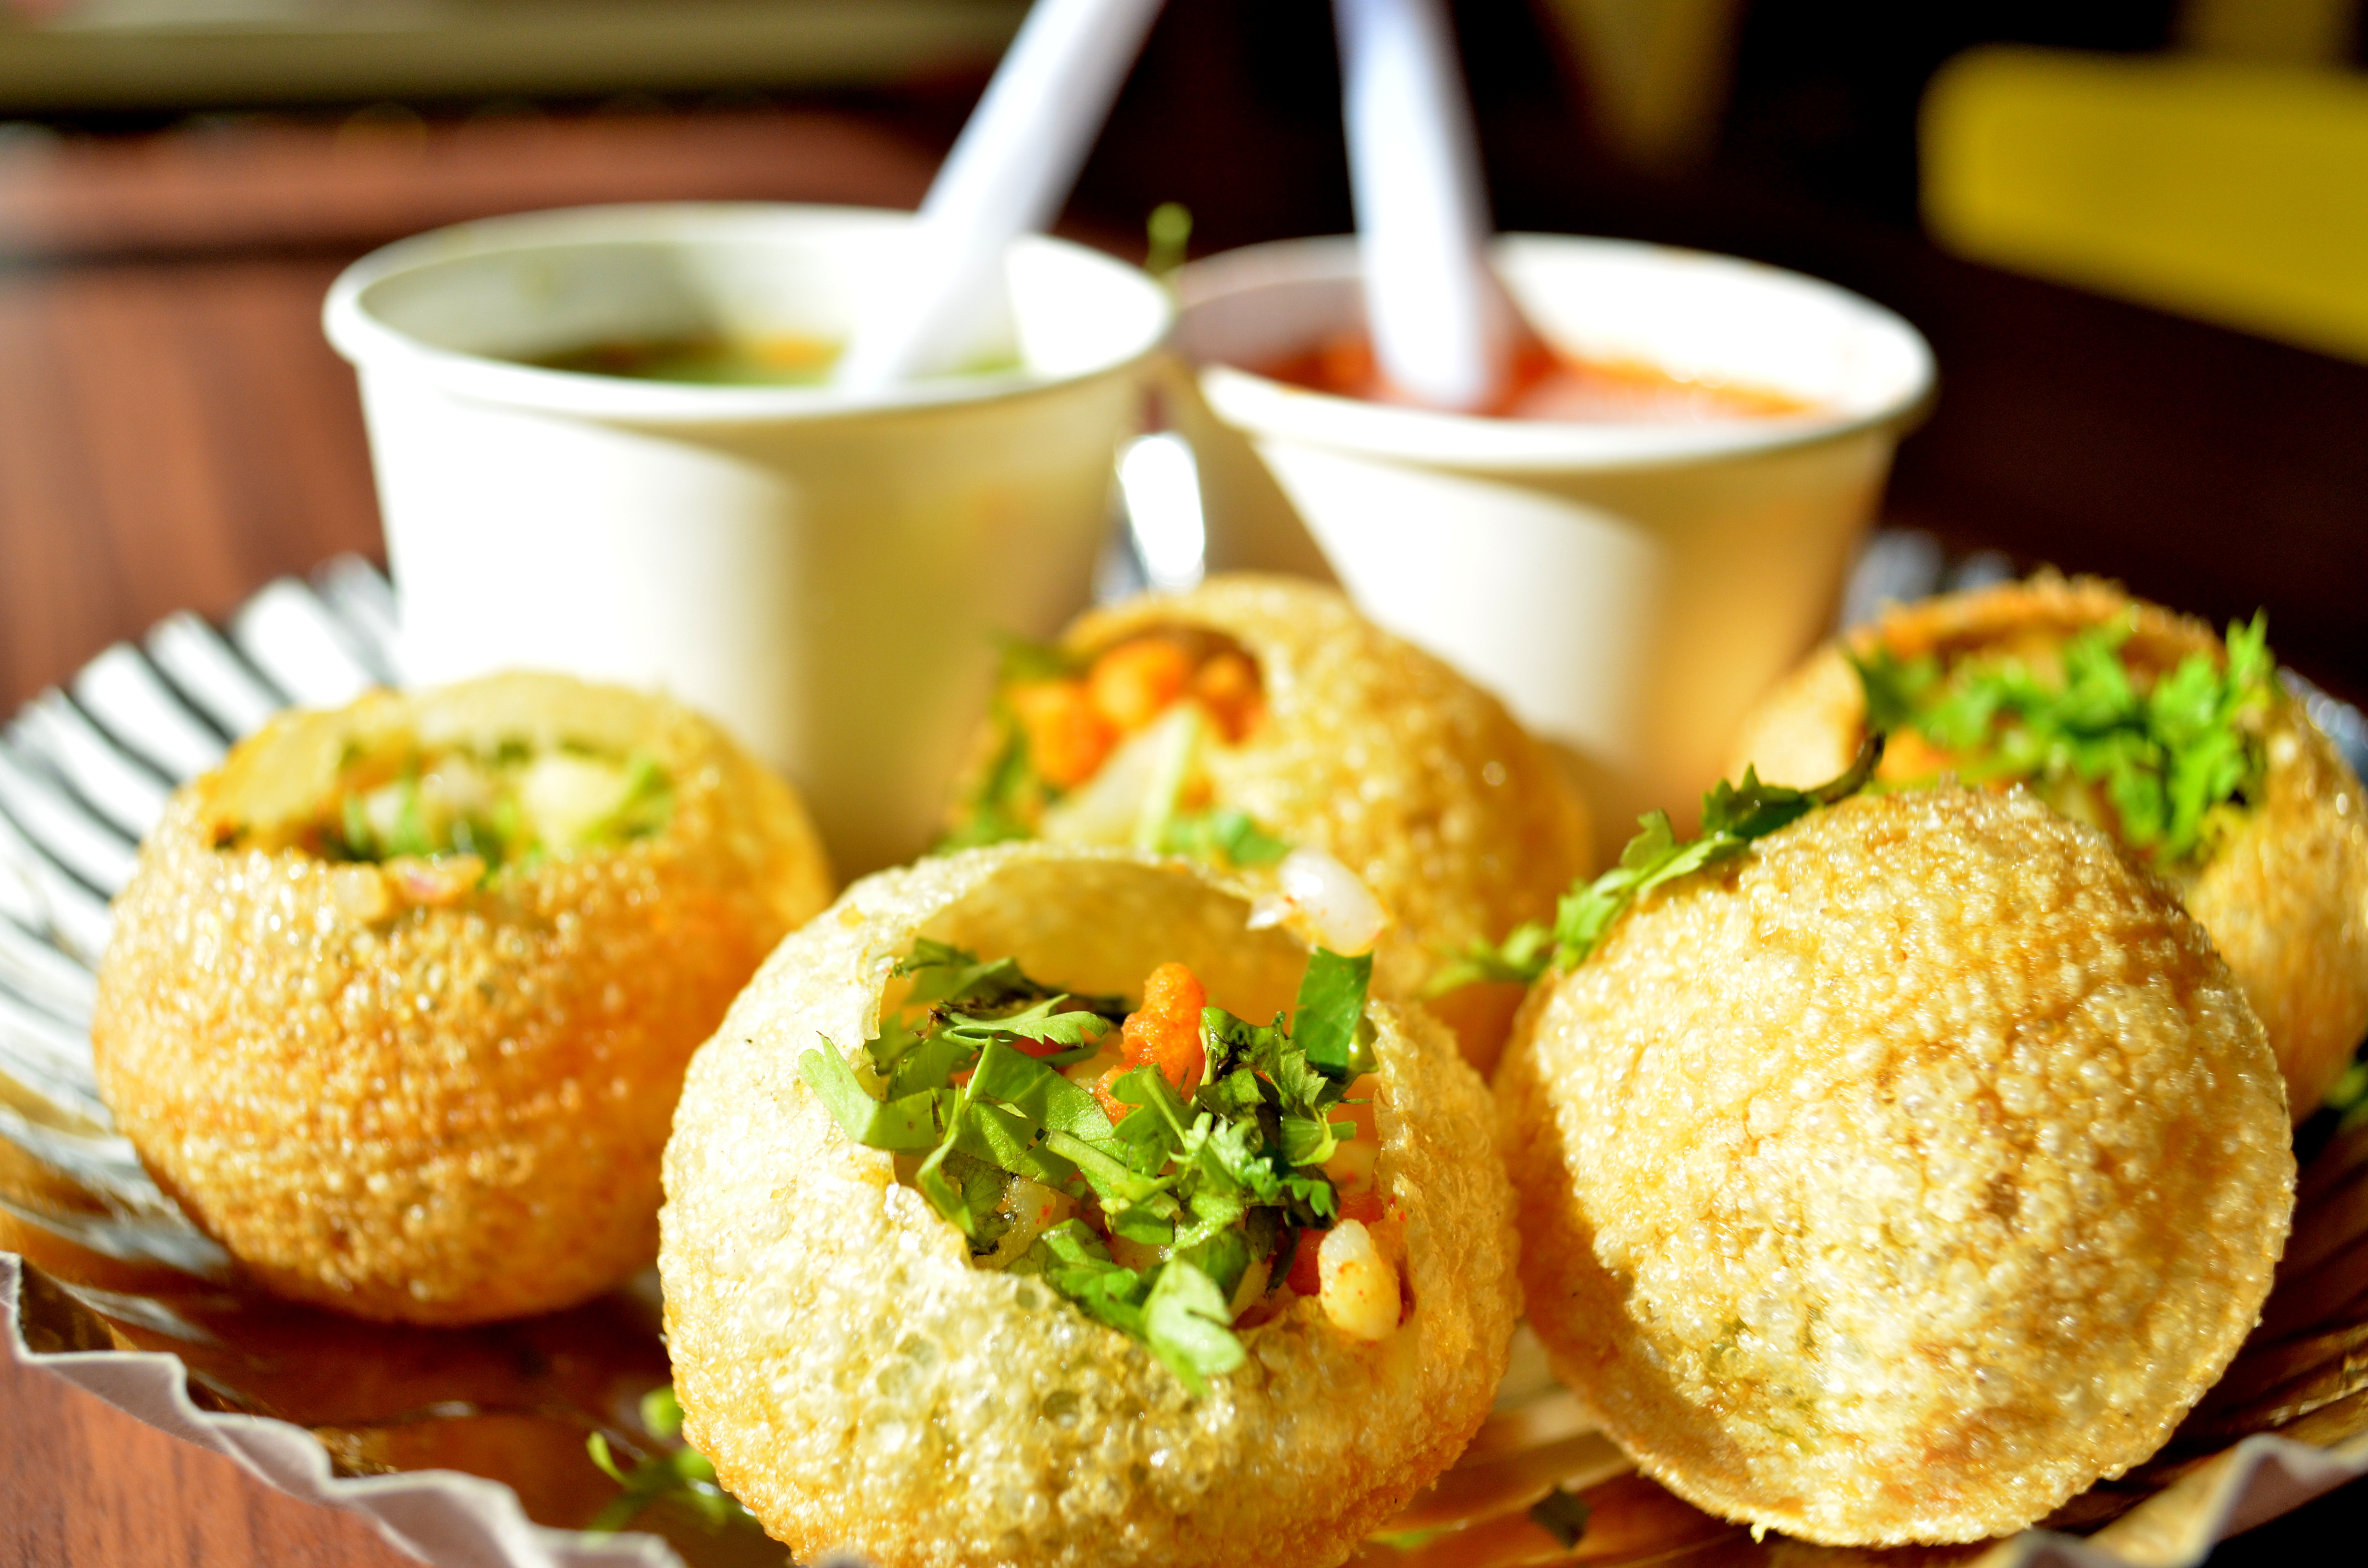 Pani Puri Picture - Image Abyss.